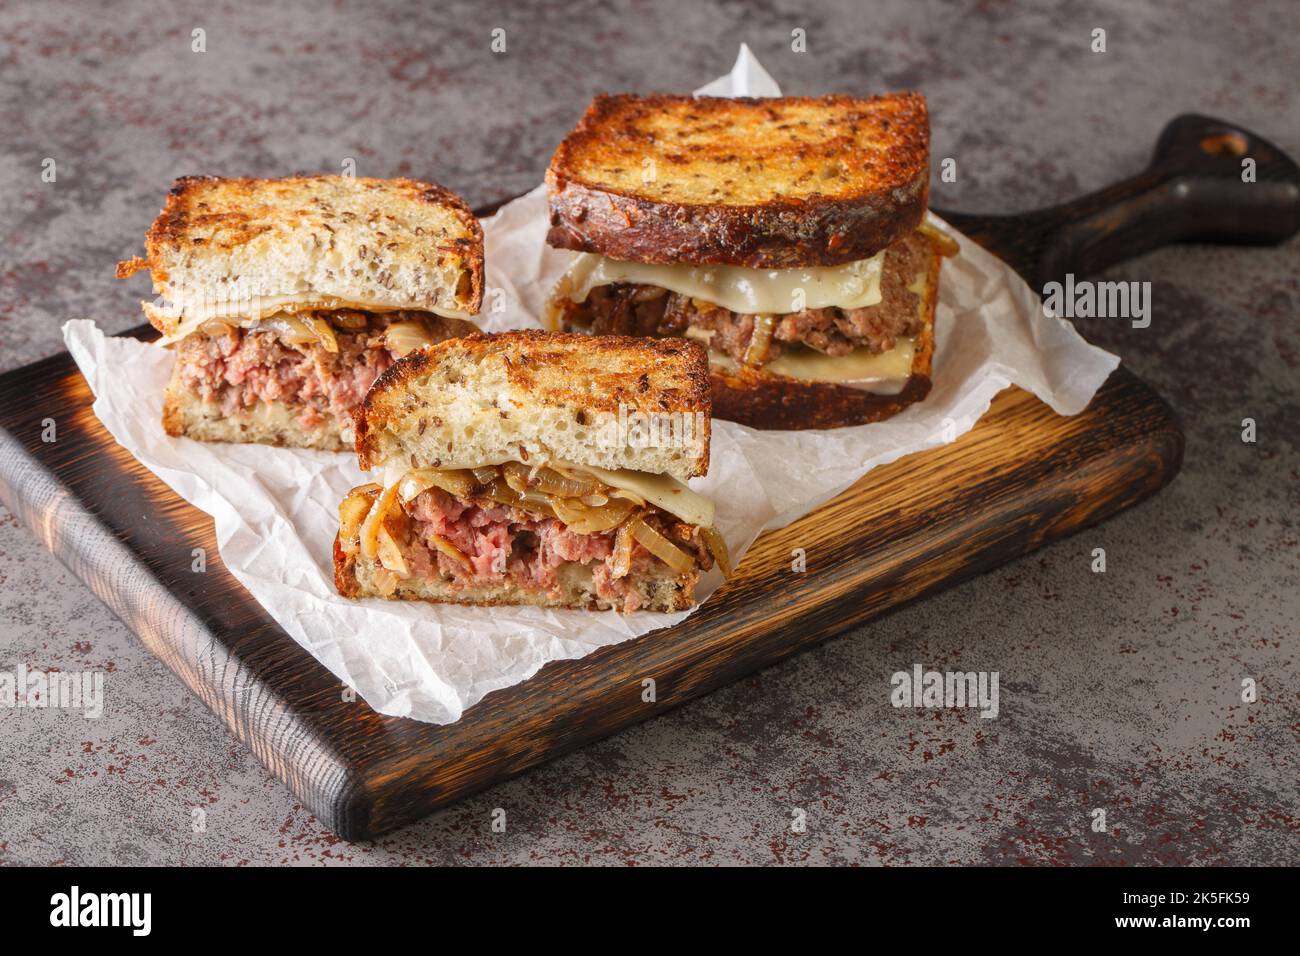 patty melt is a sandwich consisting of a ground beef patty with melted cheese and topped with caramelized onions between two slices of griddled bread Stock Photo